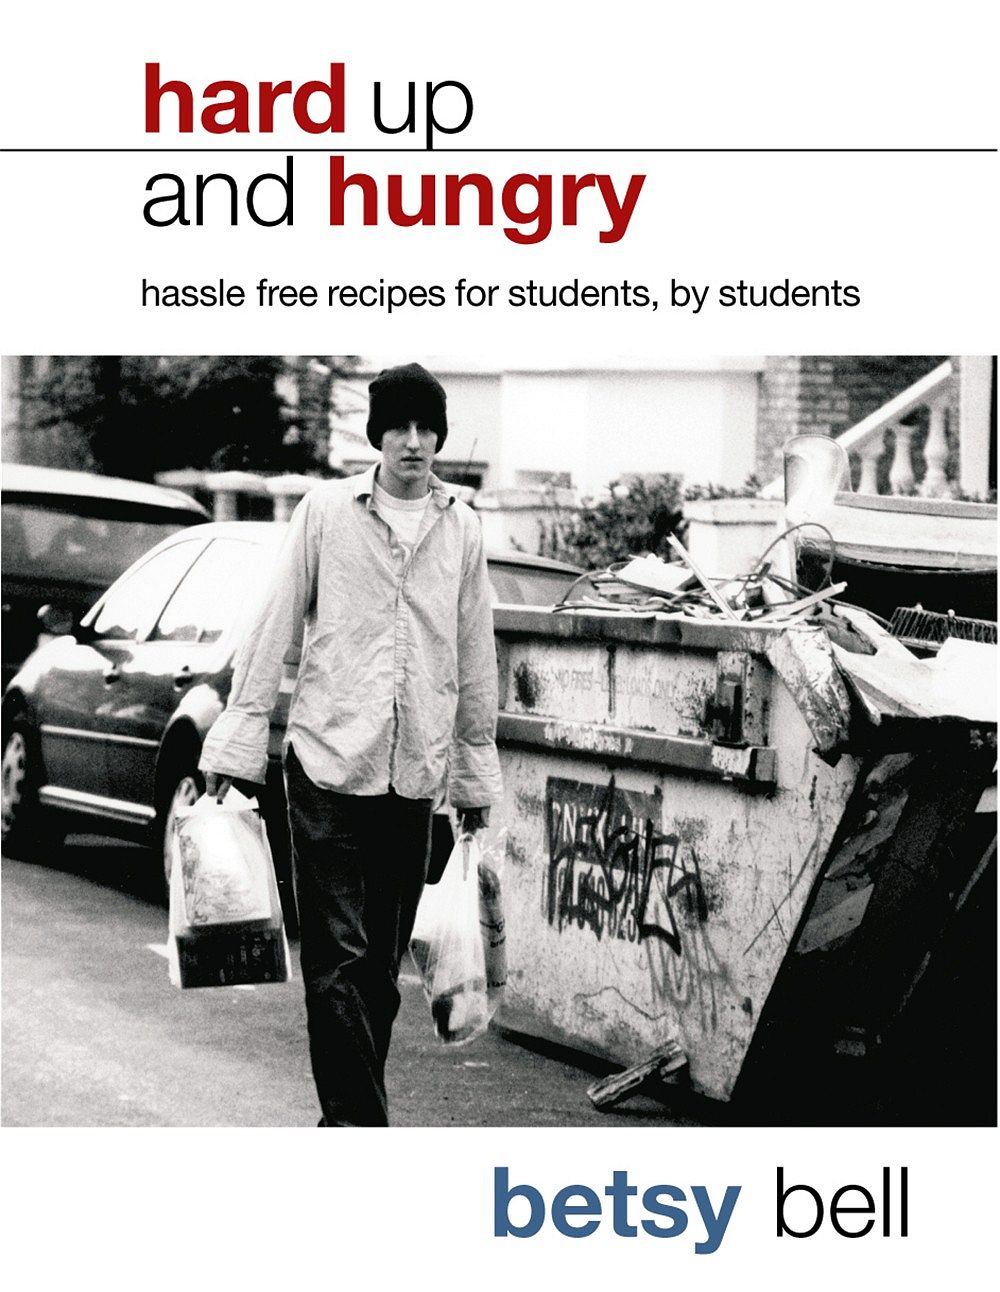 Hard Up And Hungry: Hassle free recipes for students, by students